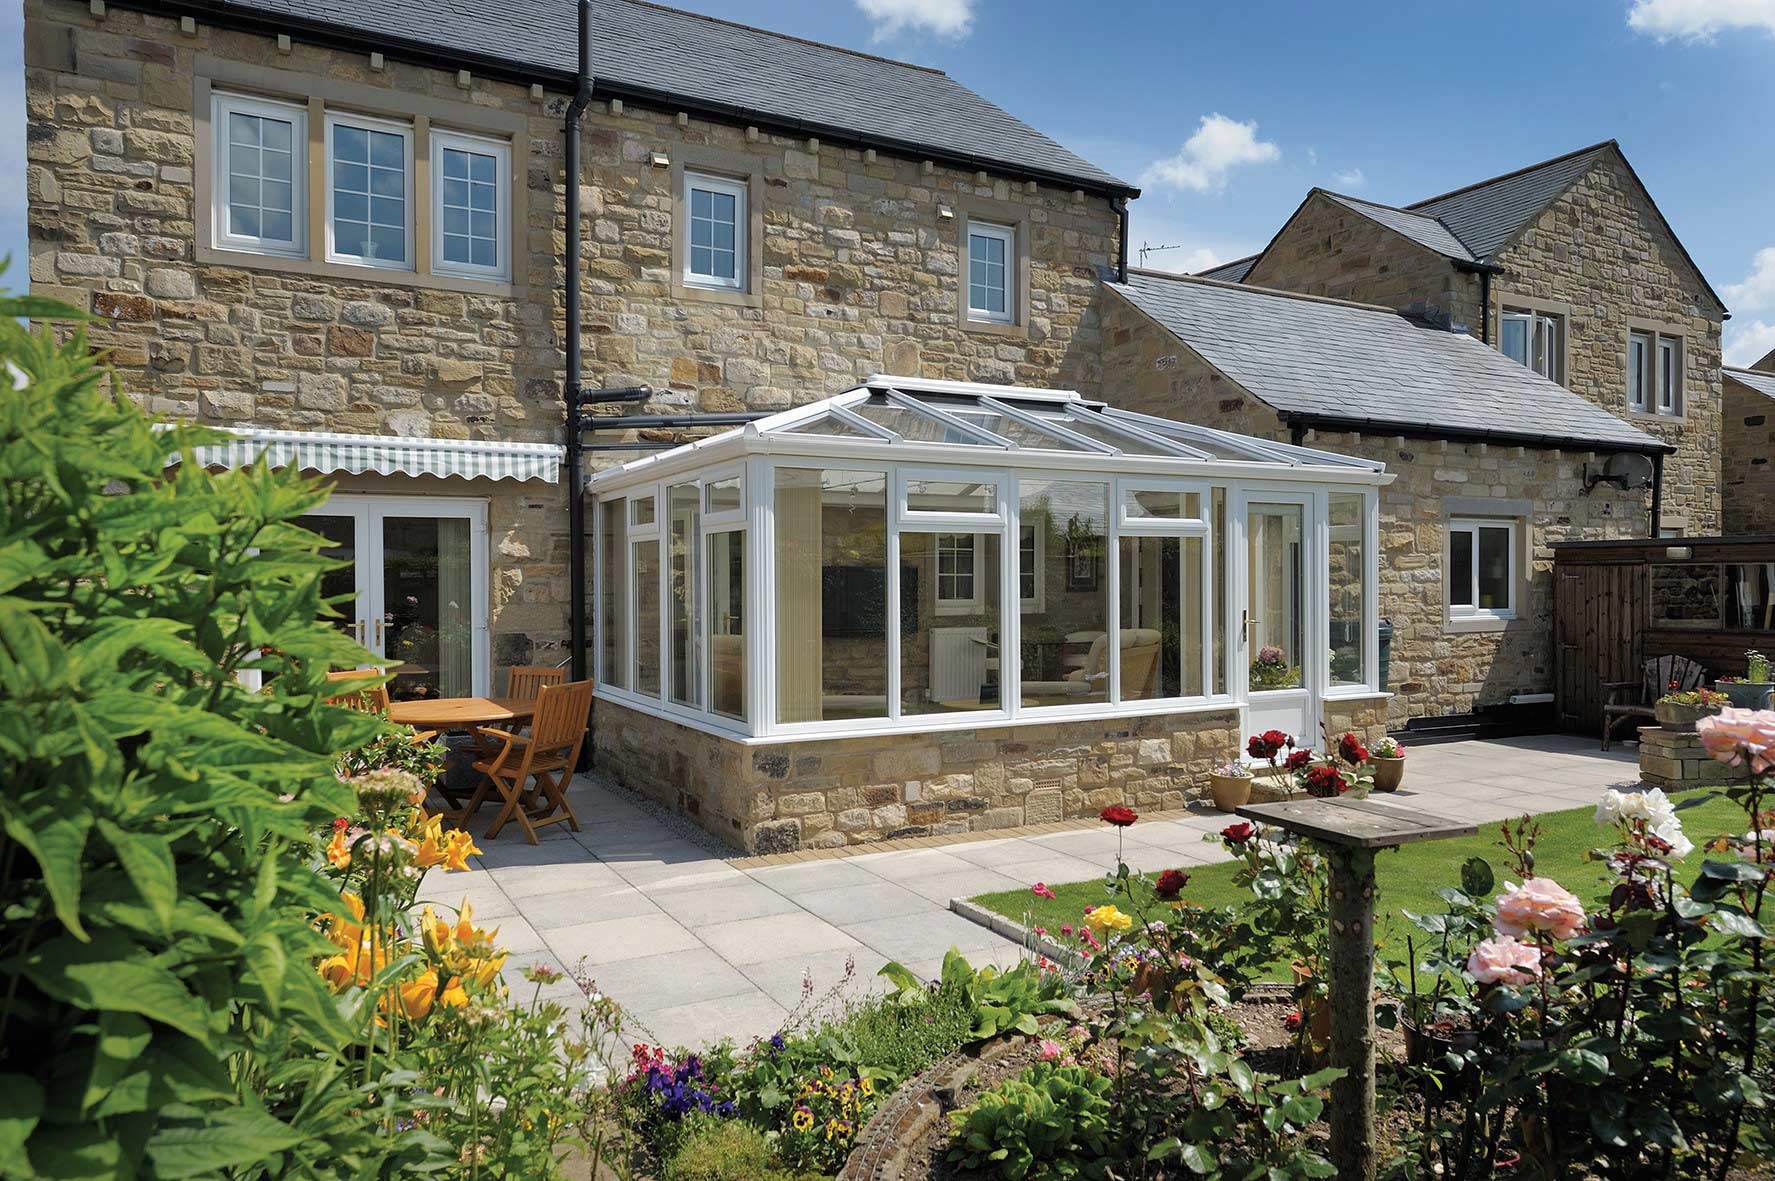 What is the difference between a Conservatory and an Orangery?